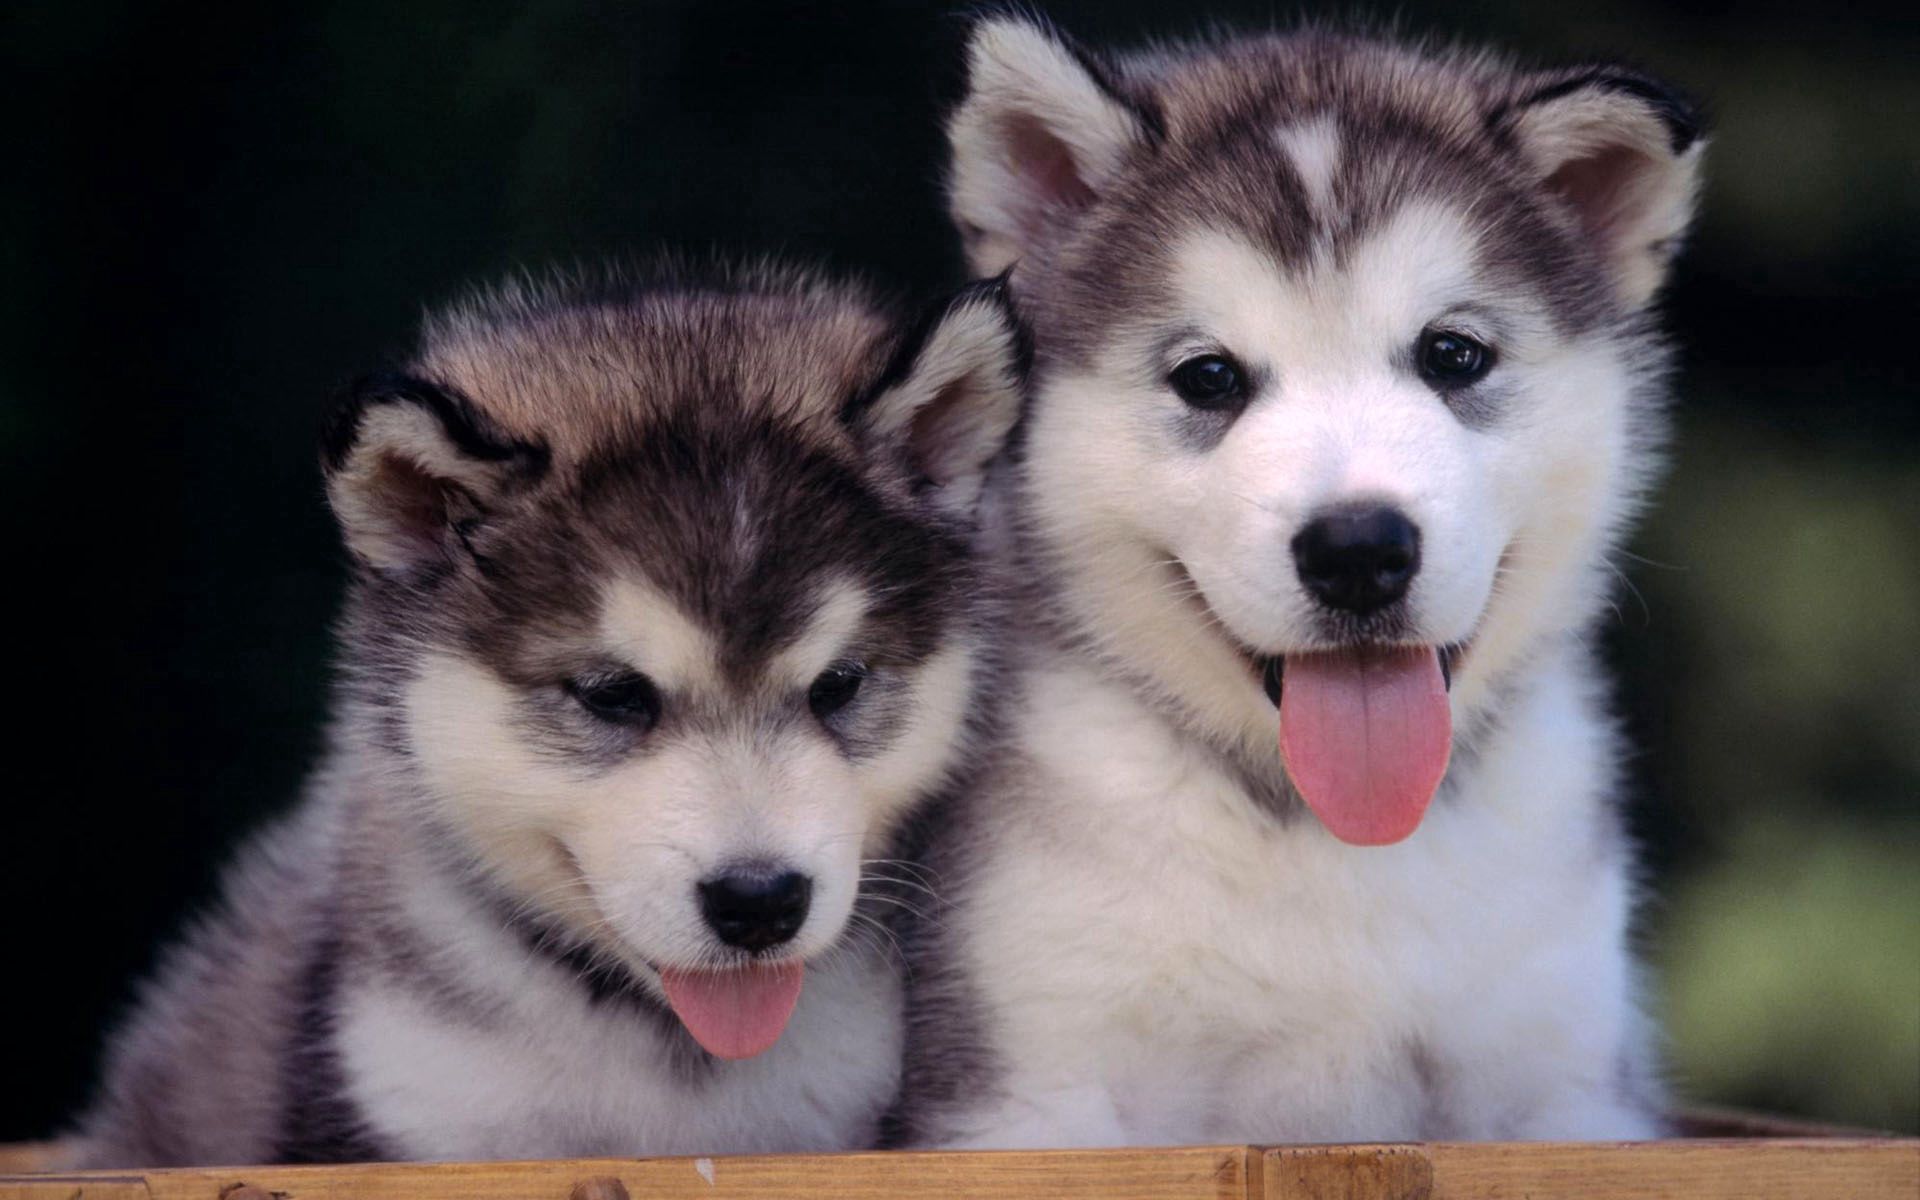 80430 download wallpaper animals, couple, pair, relaxation, rest, husky, puppies screensavers and pictures for free